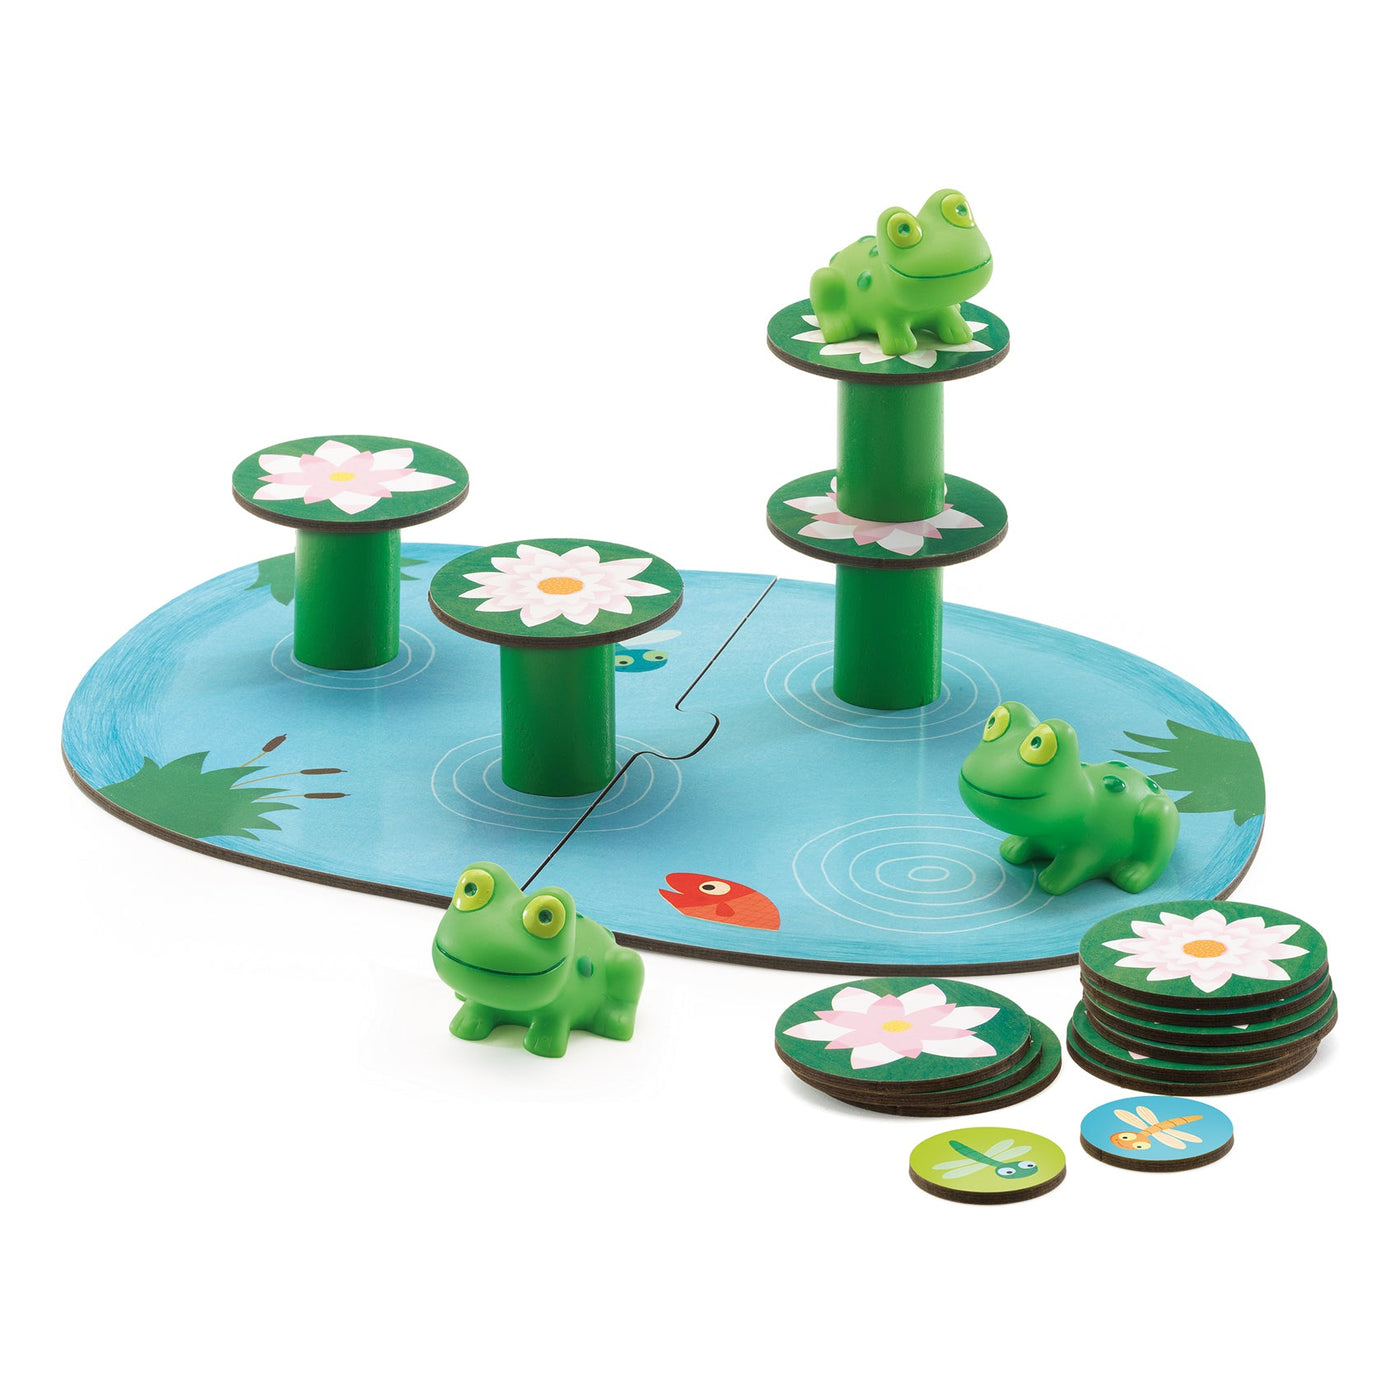 Djeco Little Frogs Balancing Game